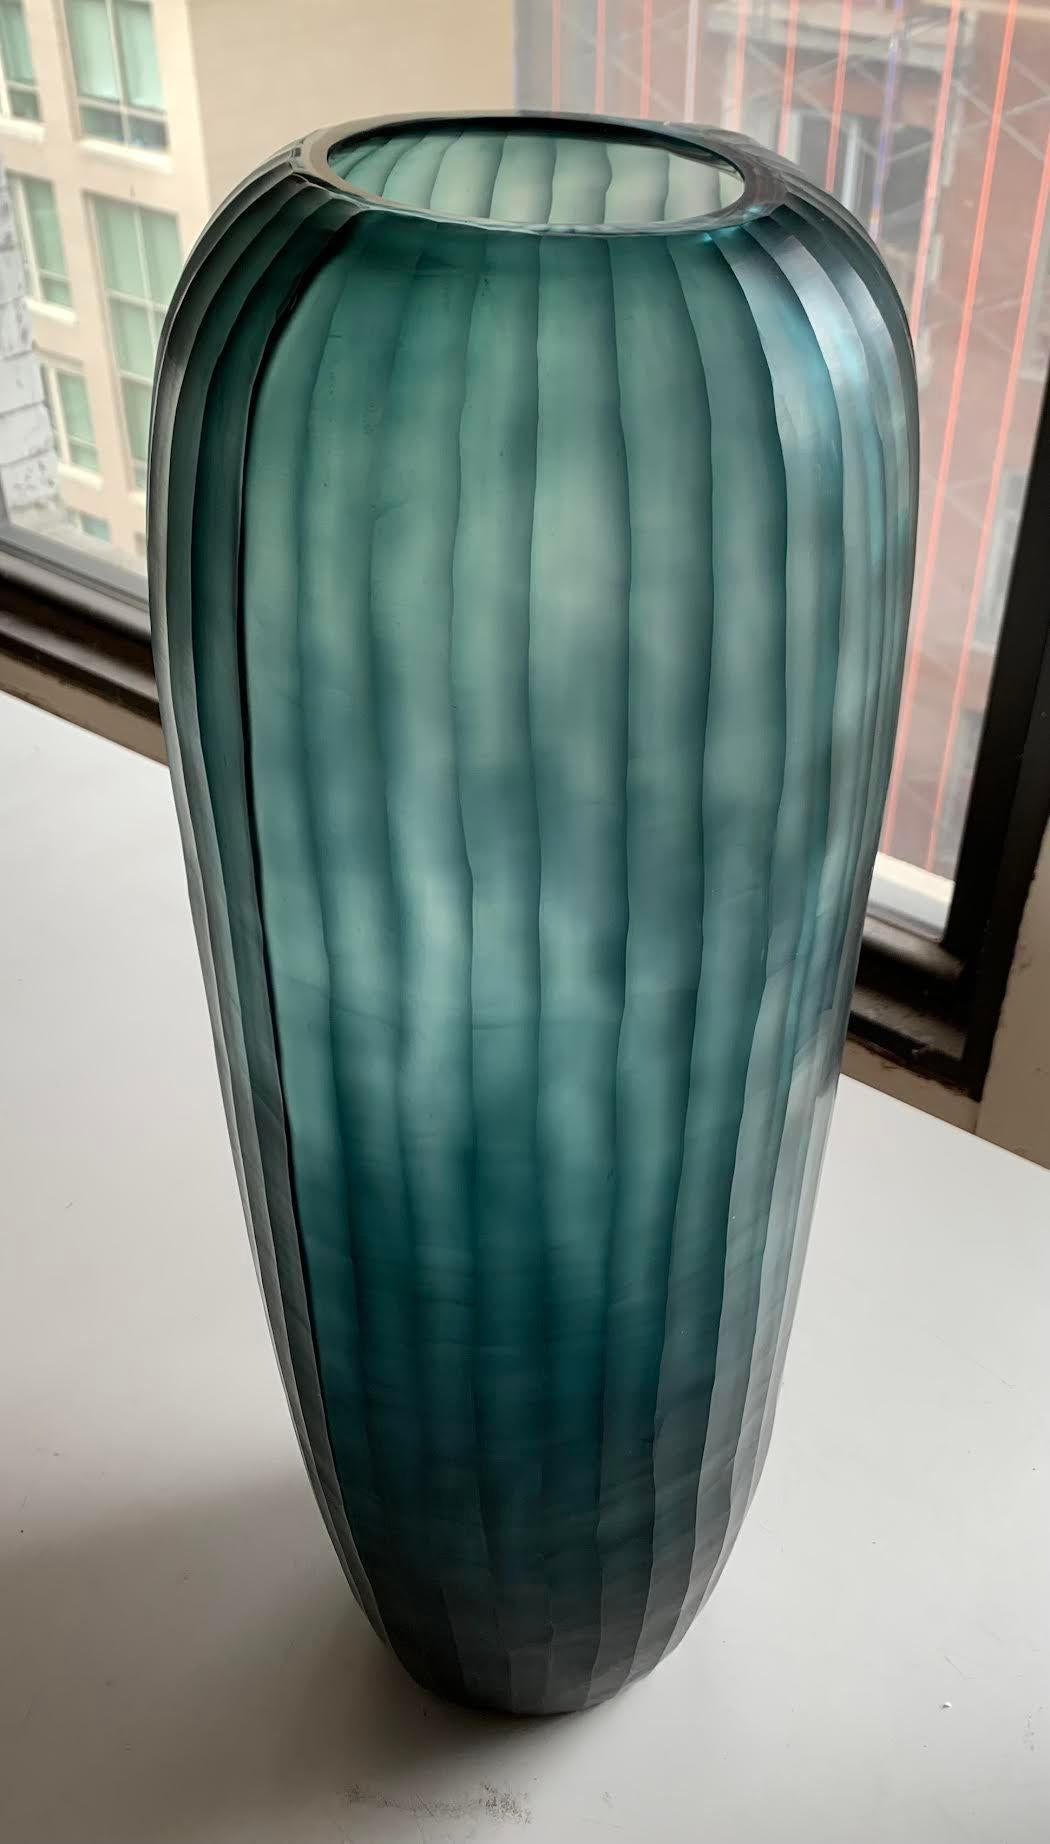 Contemporary Romanian deep blue cut glass vase.
Vertical rib detail.
Part of a collection of deep blue glass vases (S6280 thru S6286 ).
Can hold water.
